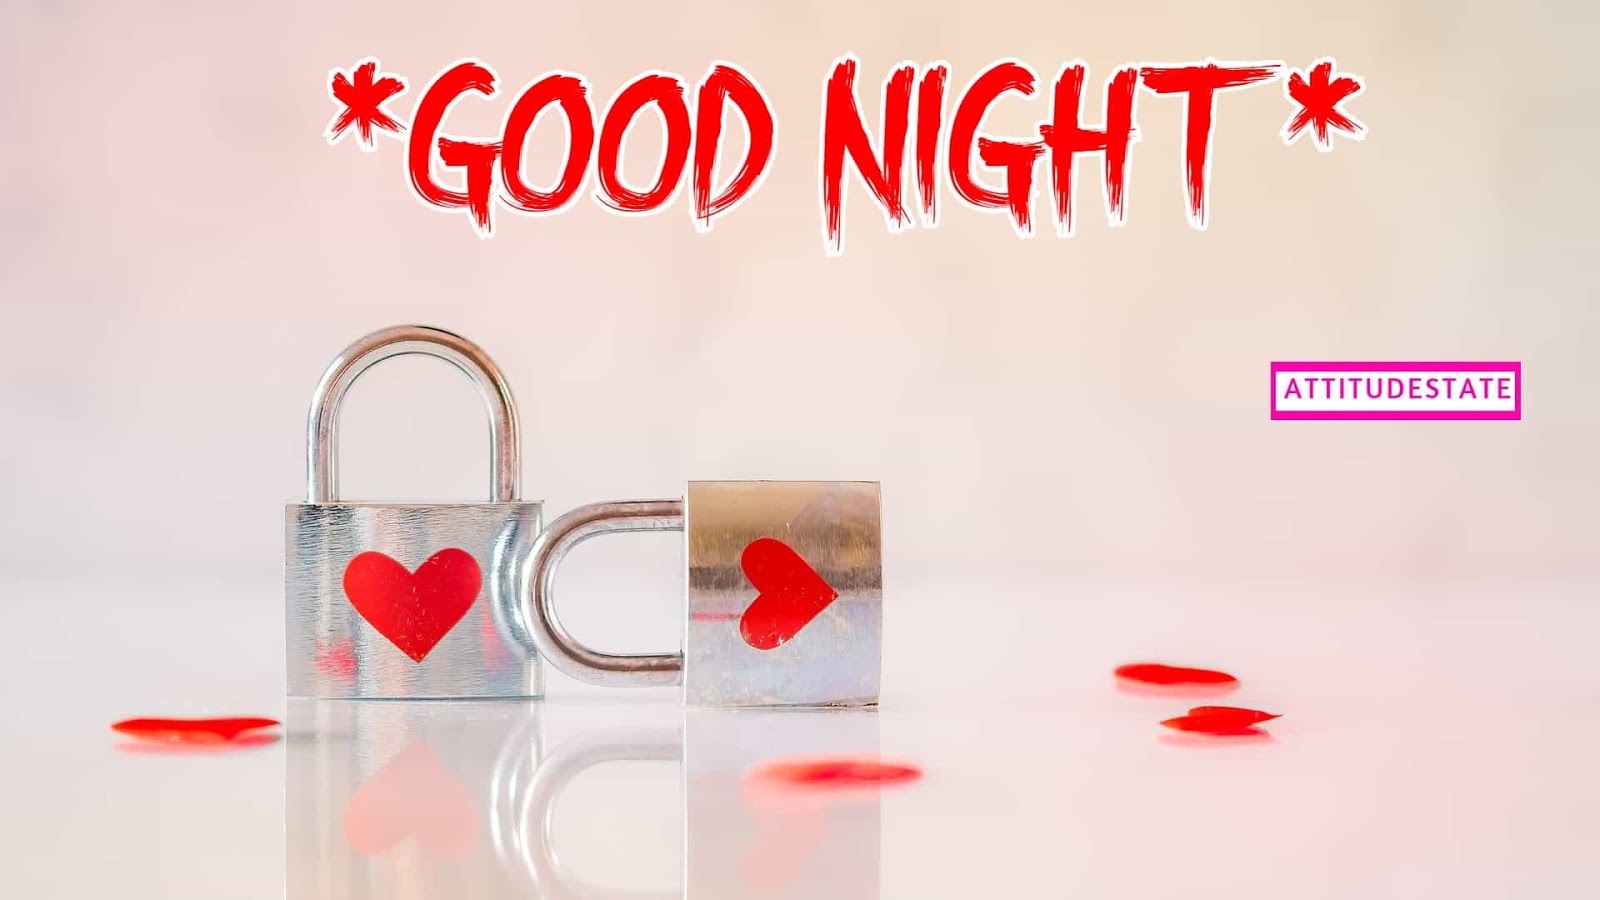 Good Night Images For Whatsapp Free Download Hd - Love - 1600x900 Wallpaper  